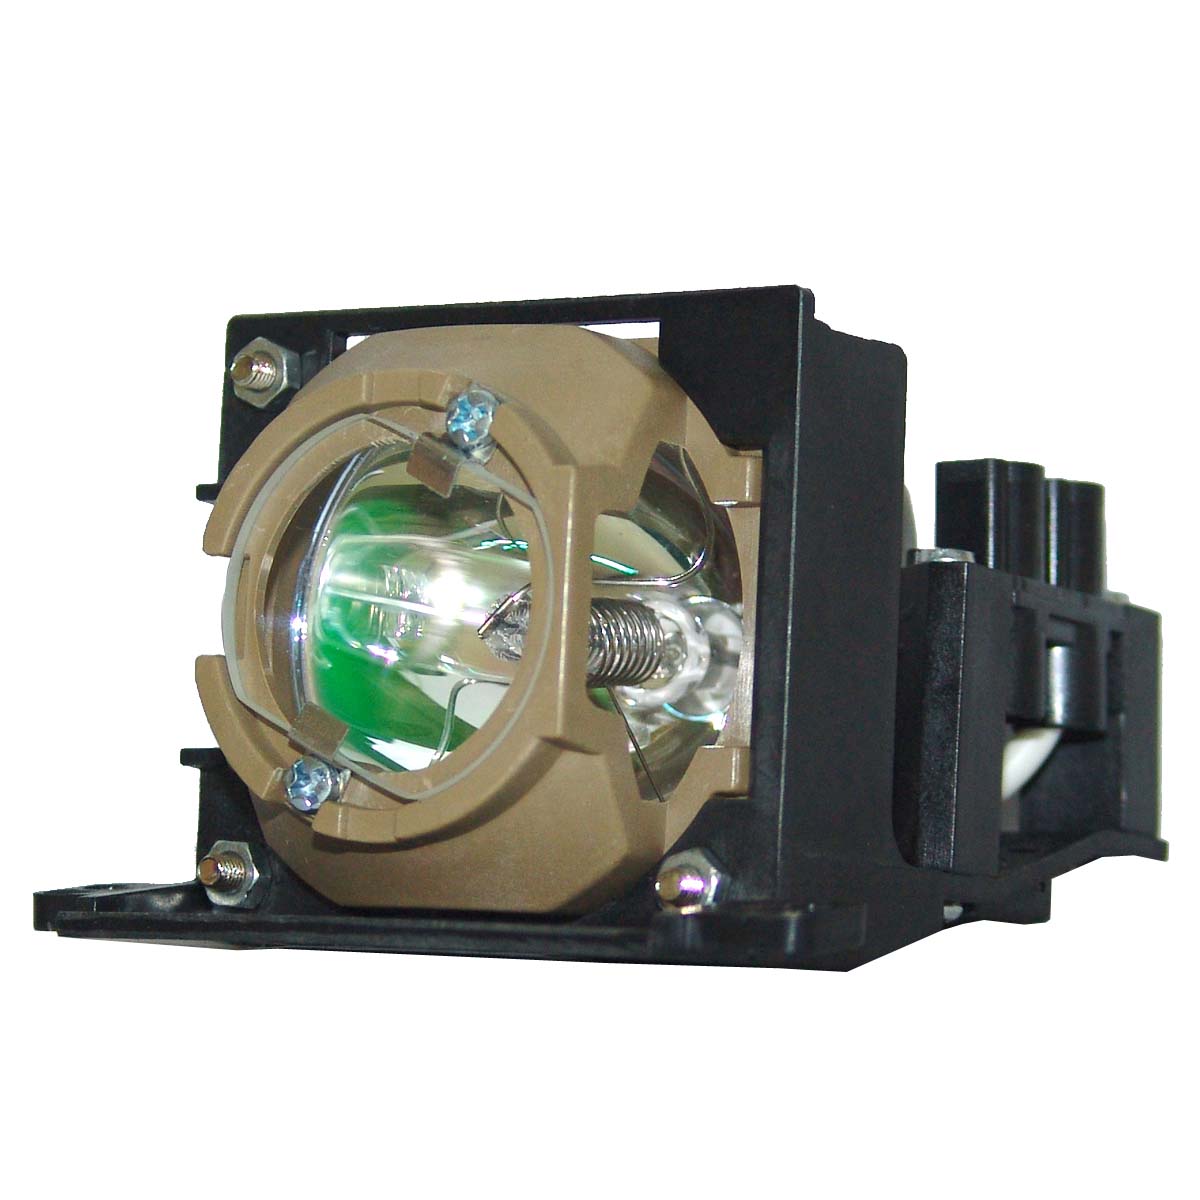 Sharp SP.83401.001 PG-M15S Projector Lamp 